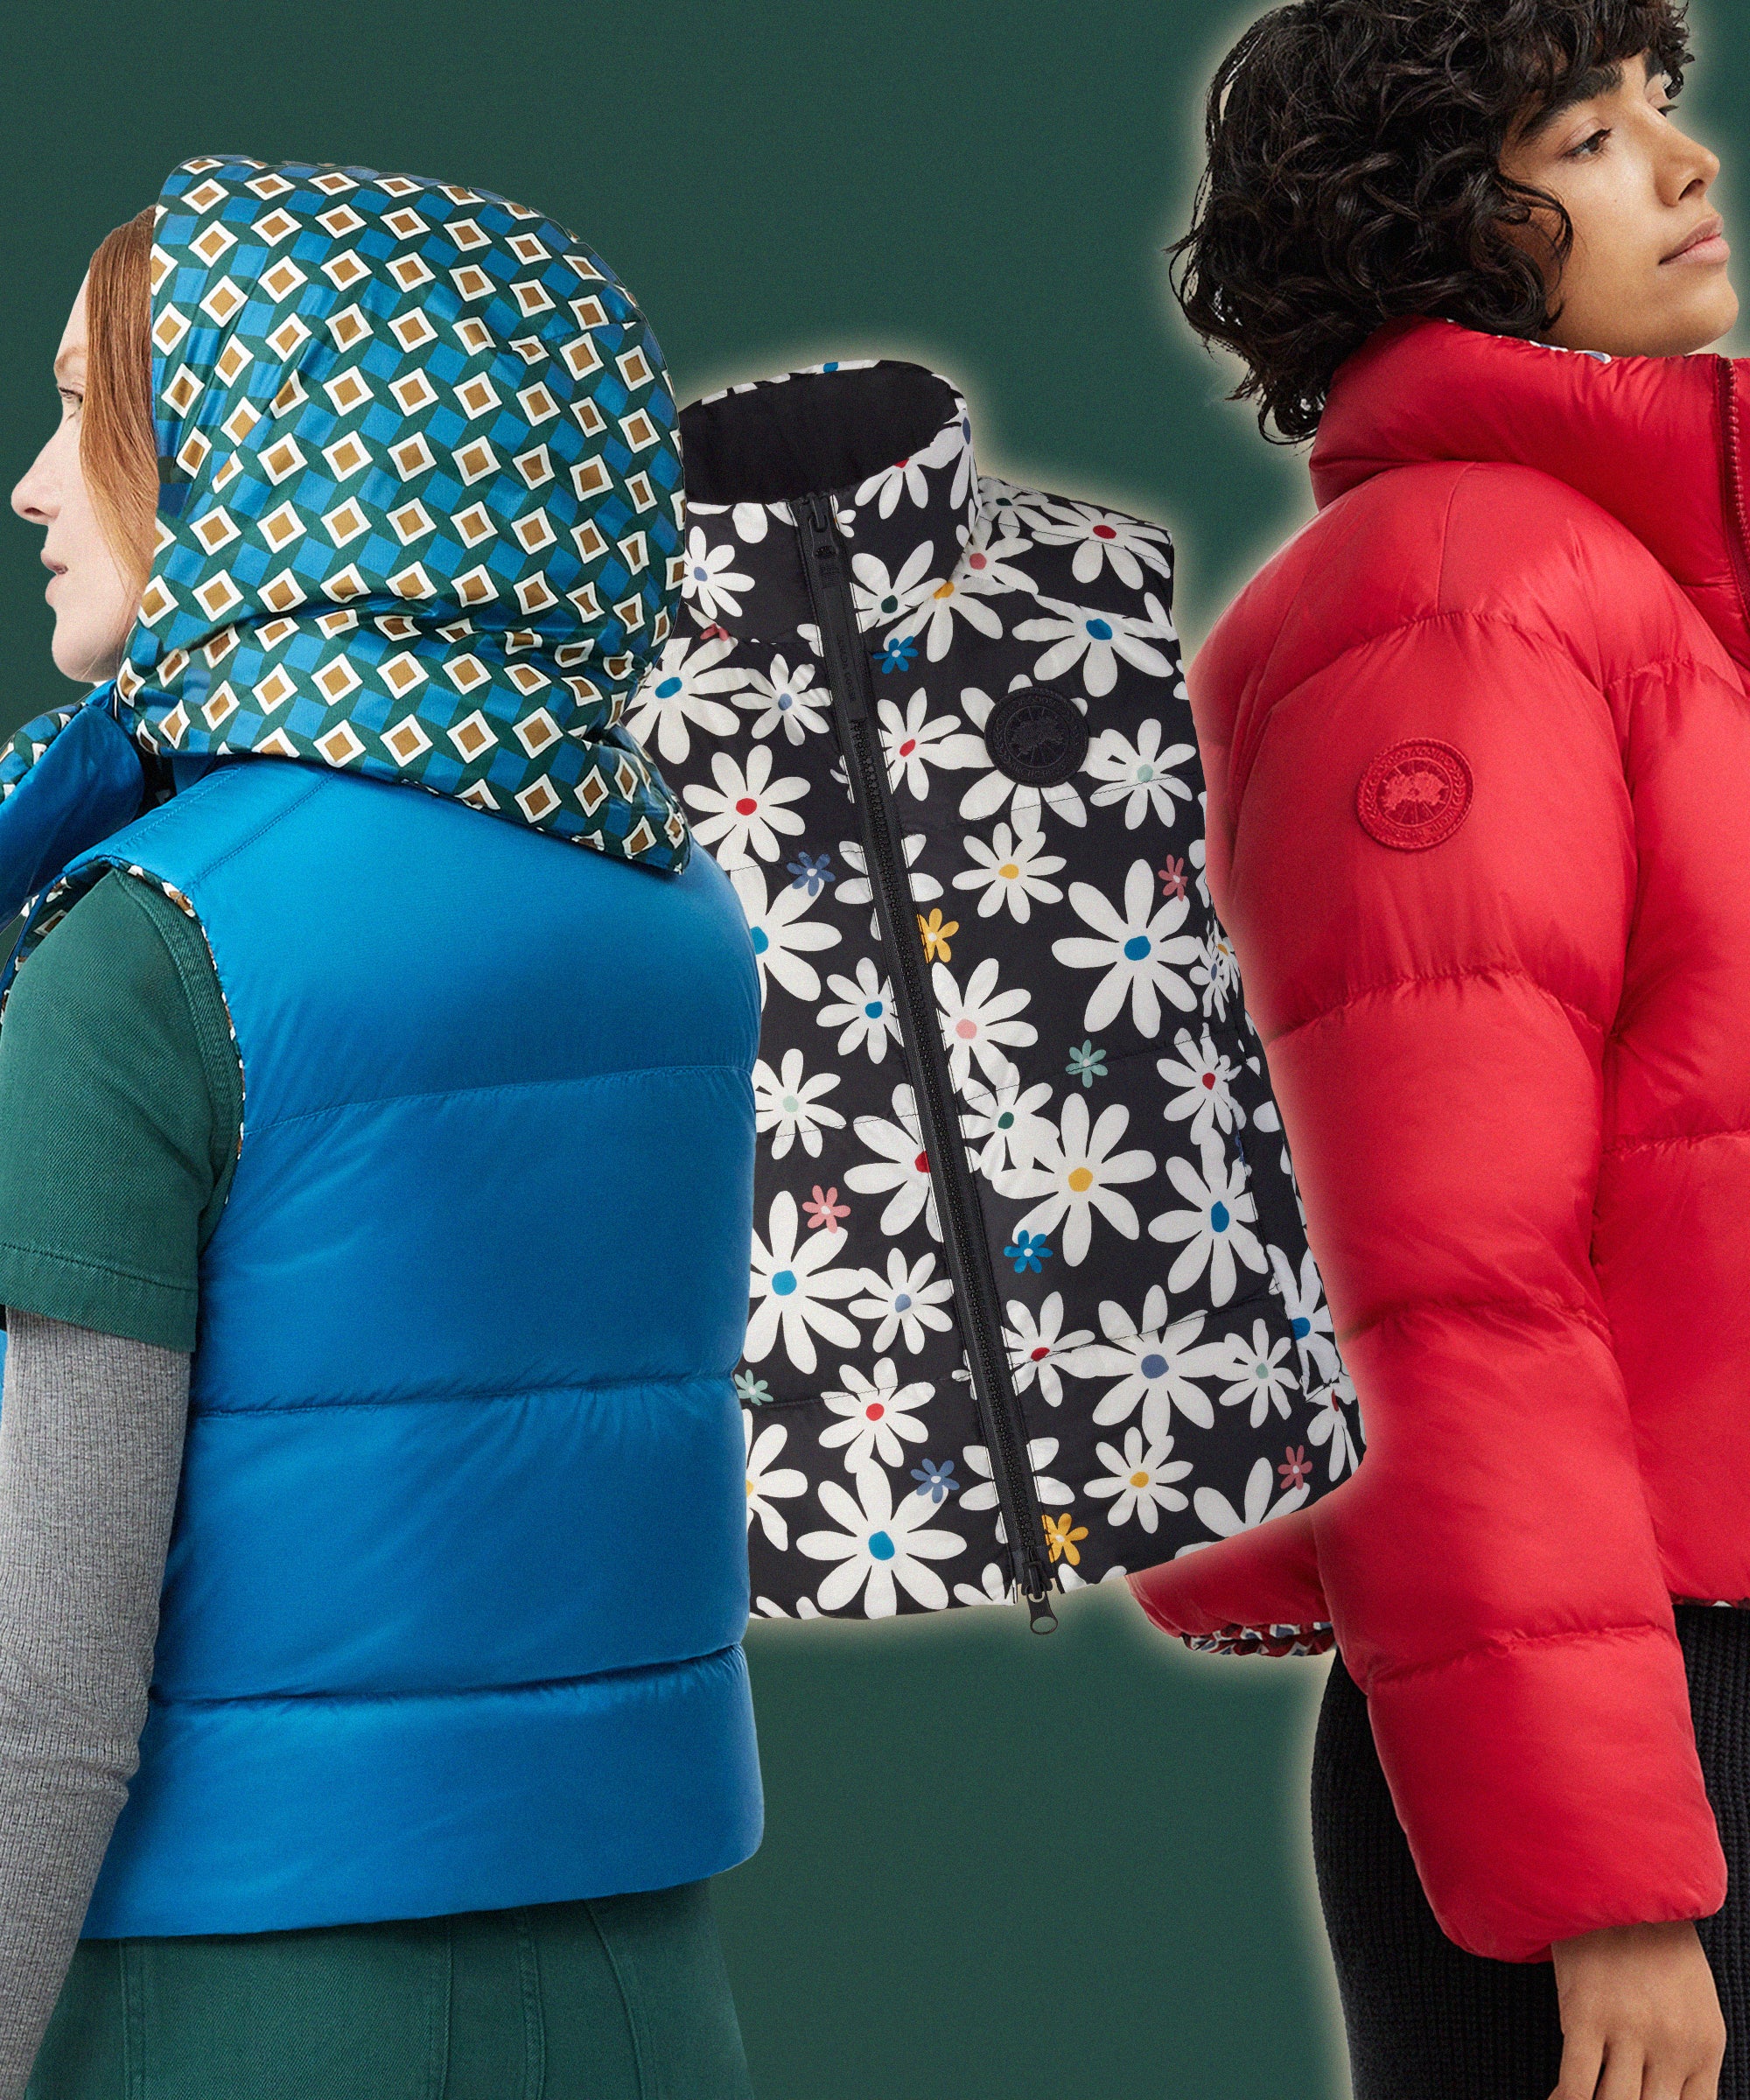 Canada Goose x Reformation: Braving The Elements Never Looked So Good